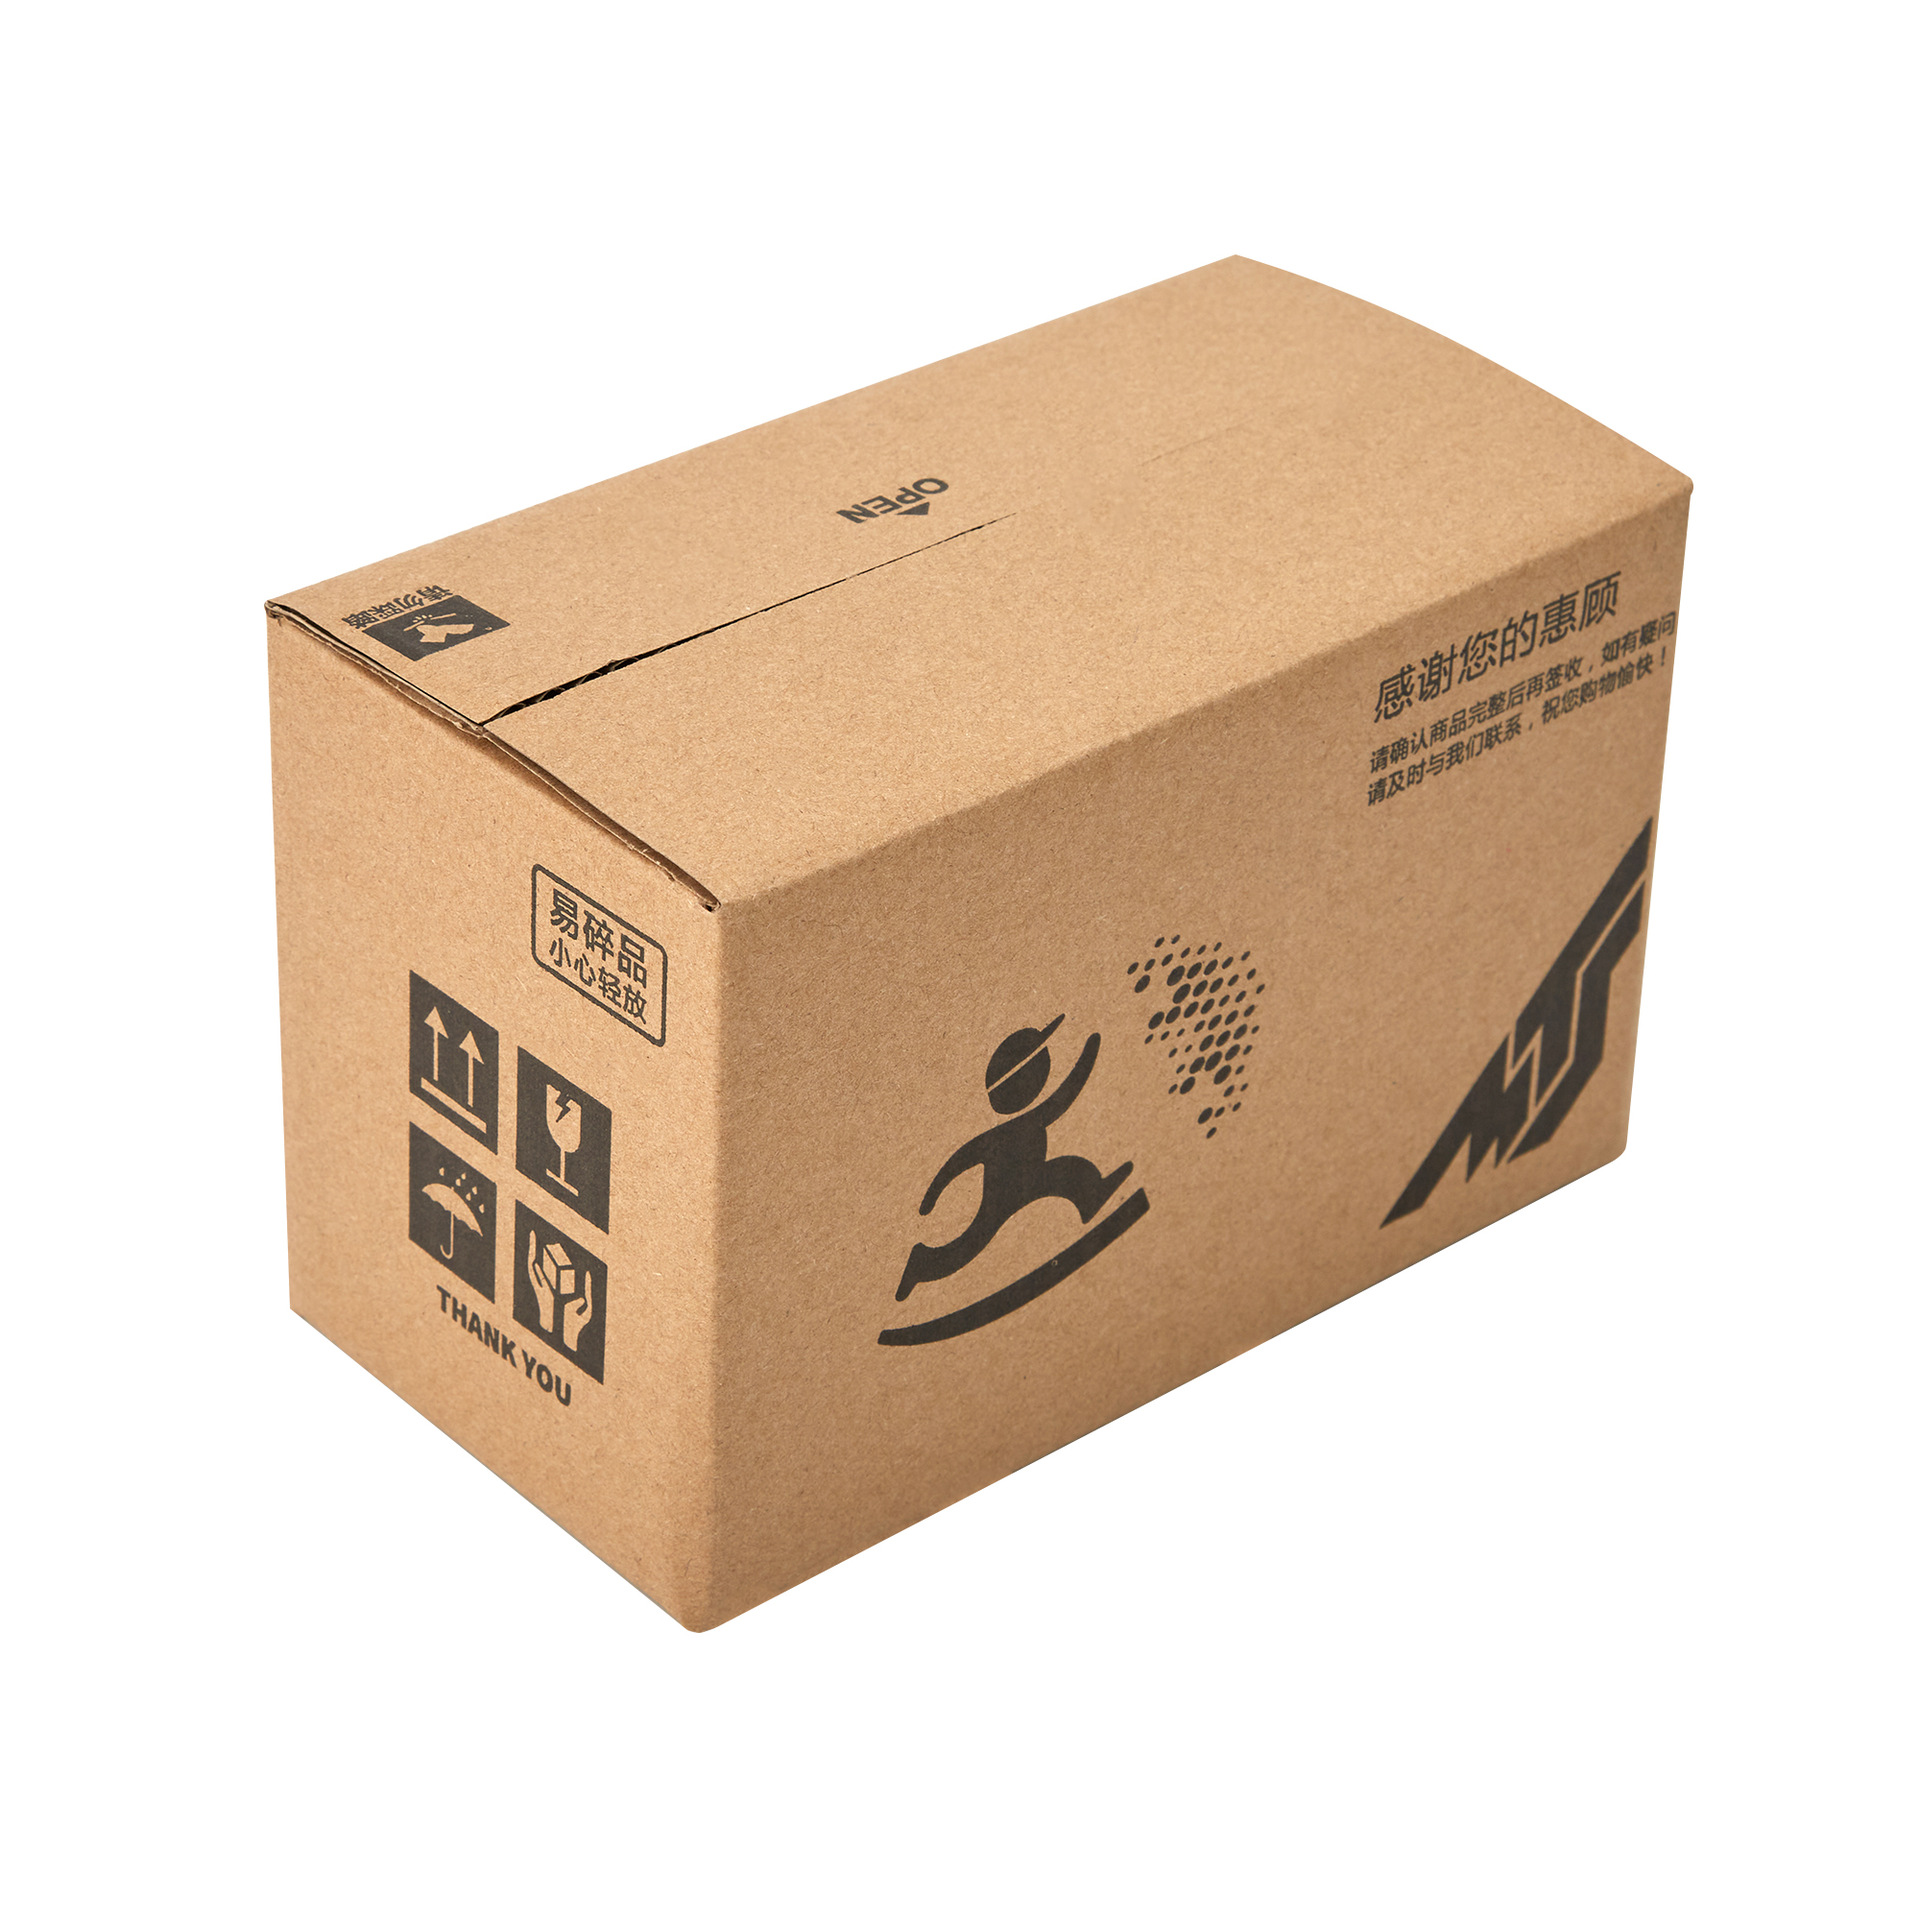 what is the advantage of the carton box